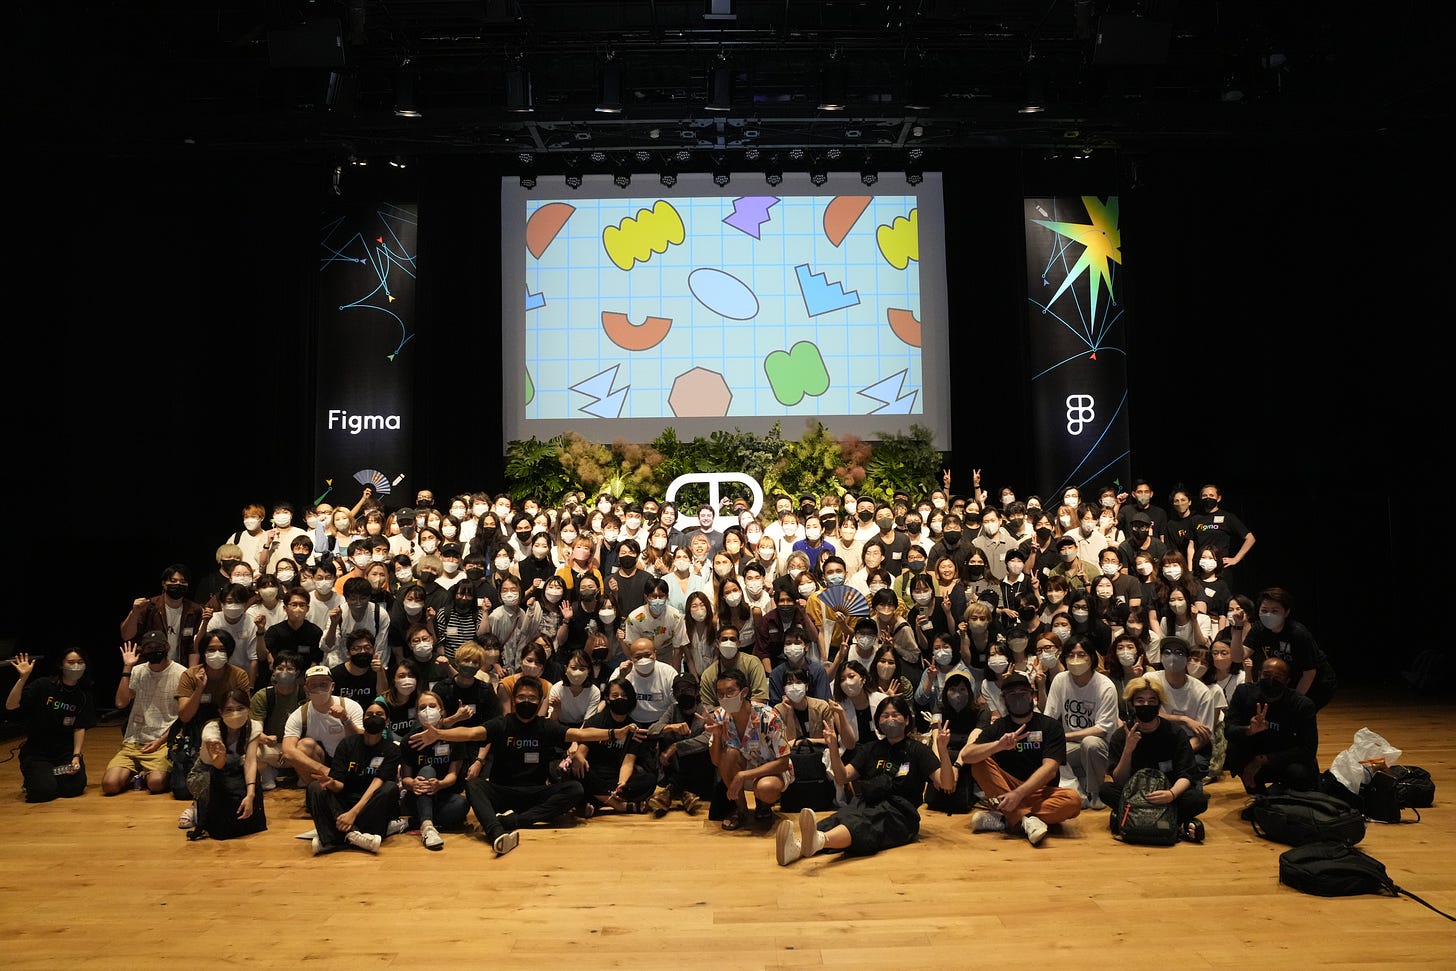 A group photo of everyone who attended the Figma Community event during the Figma Japan launch.